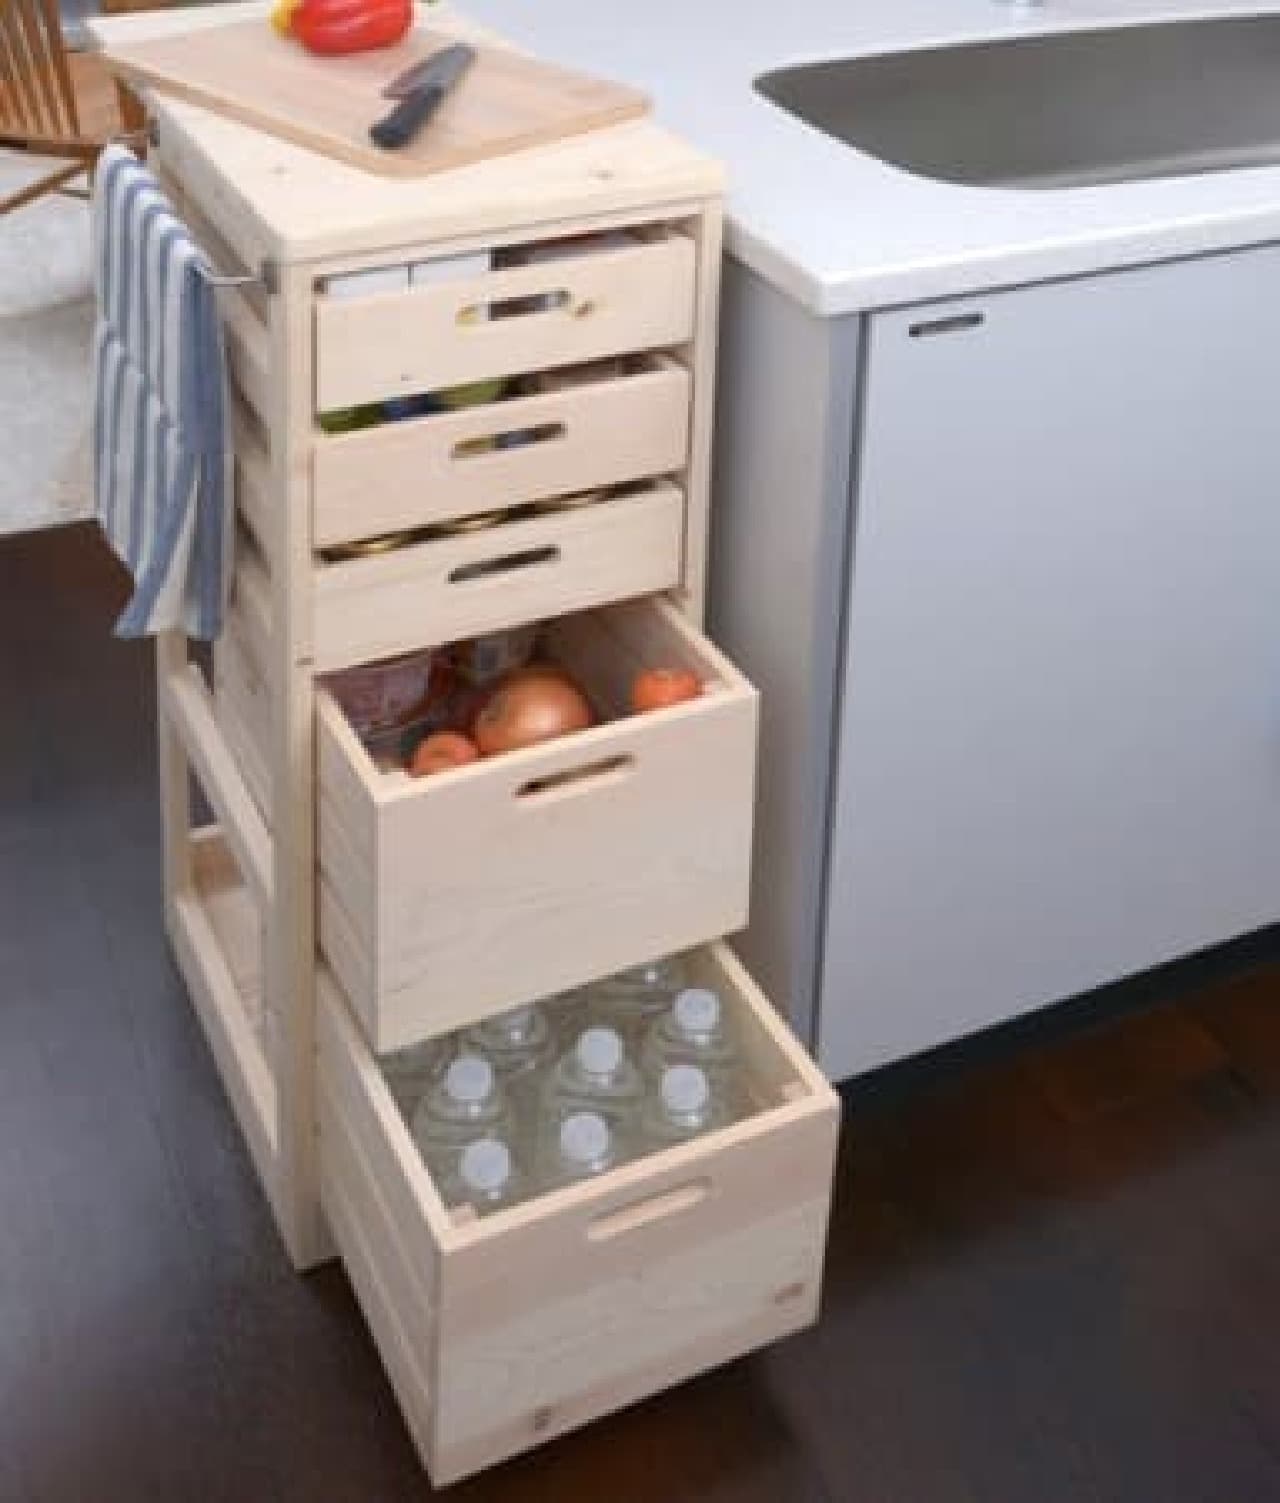 The drawer part can be pulled out and carried